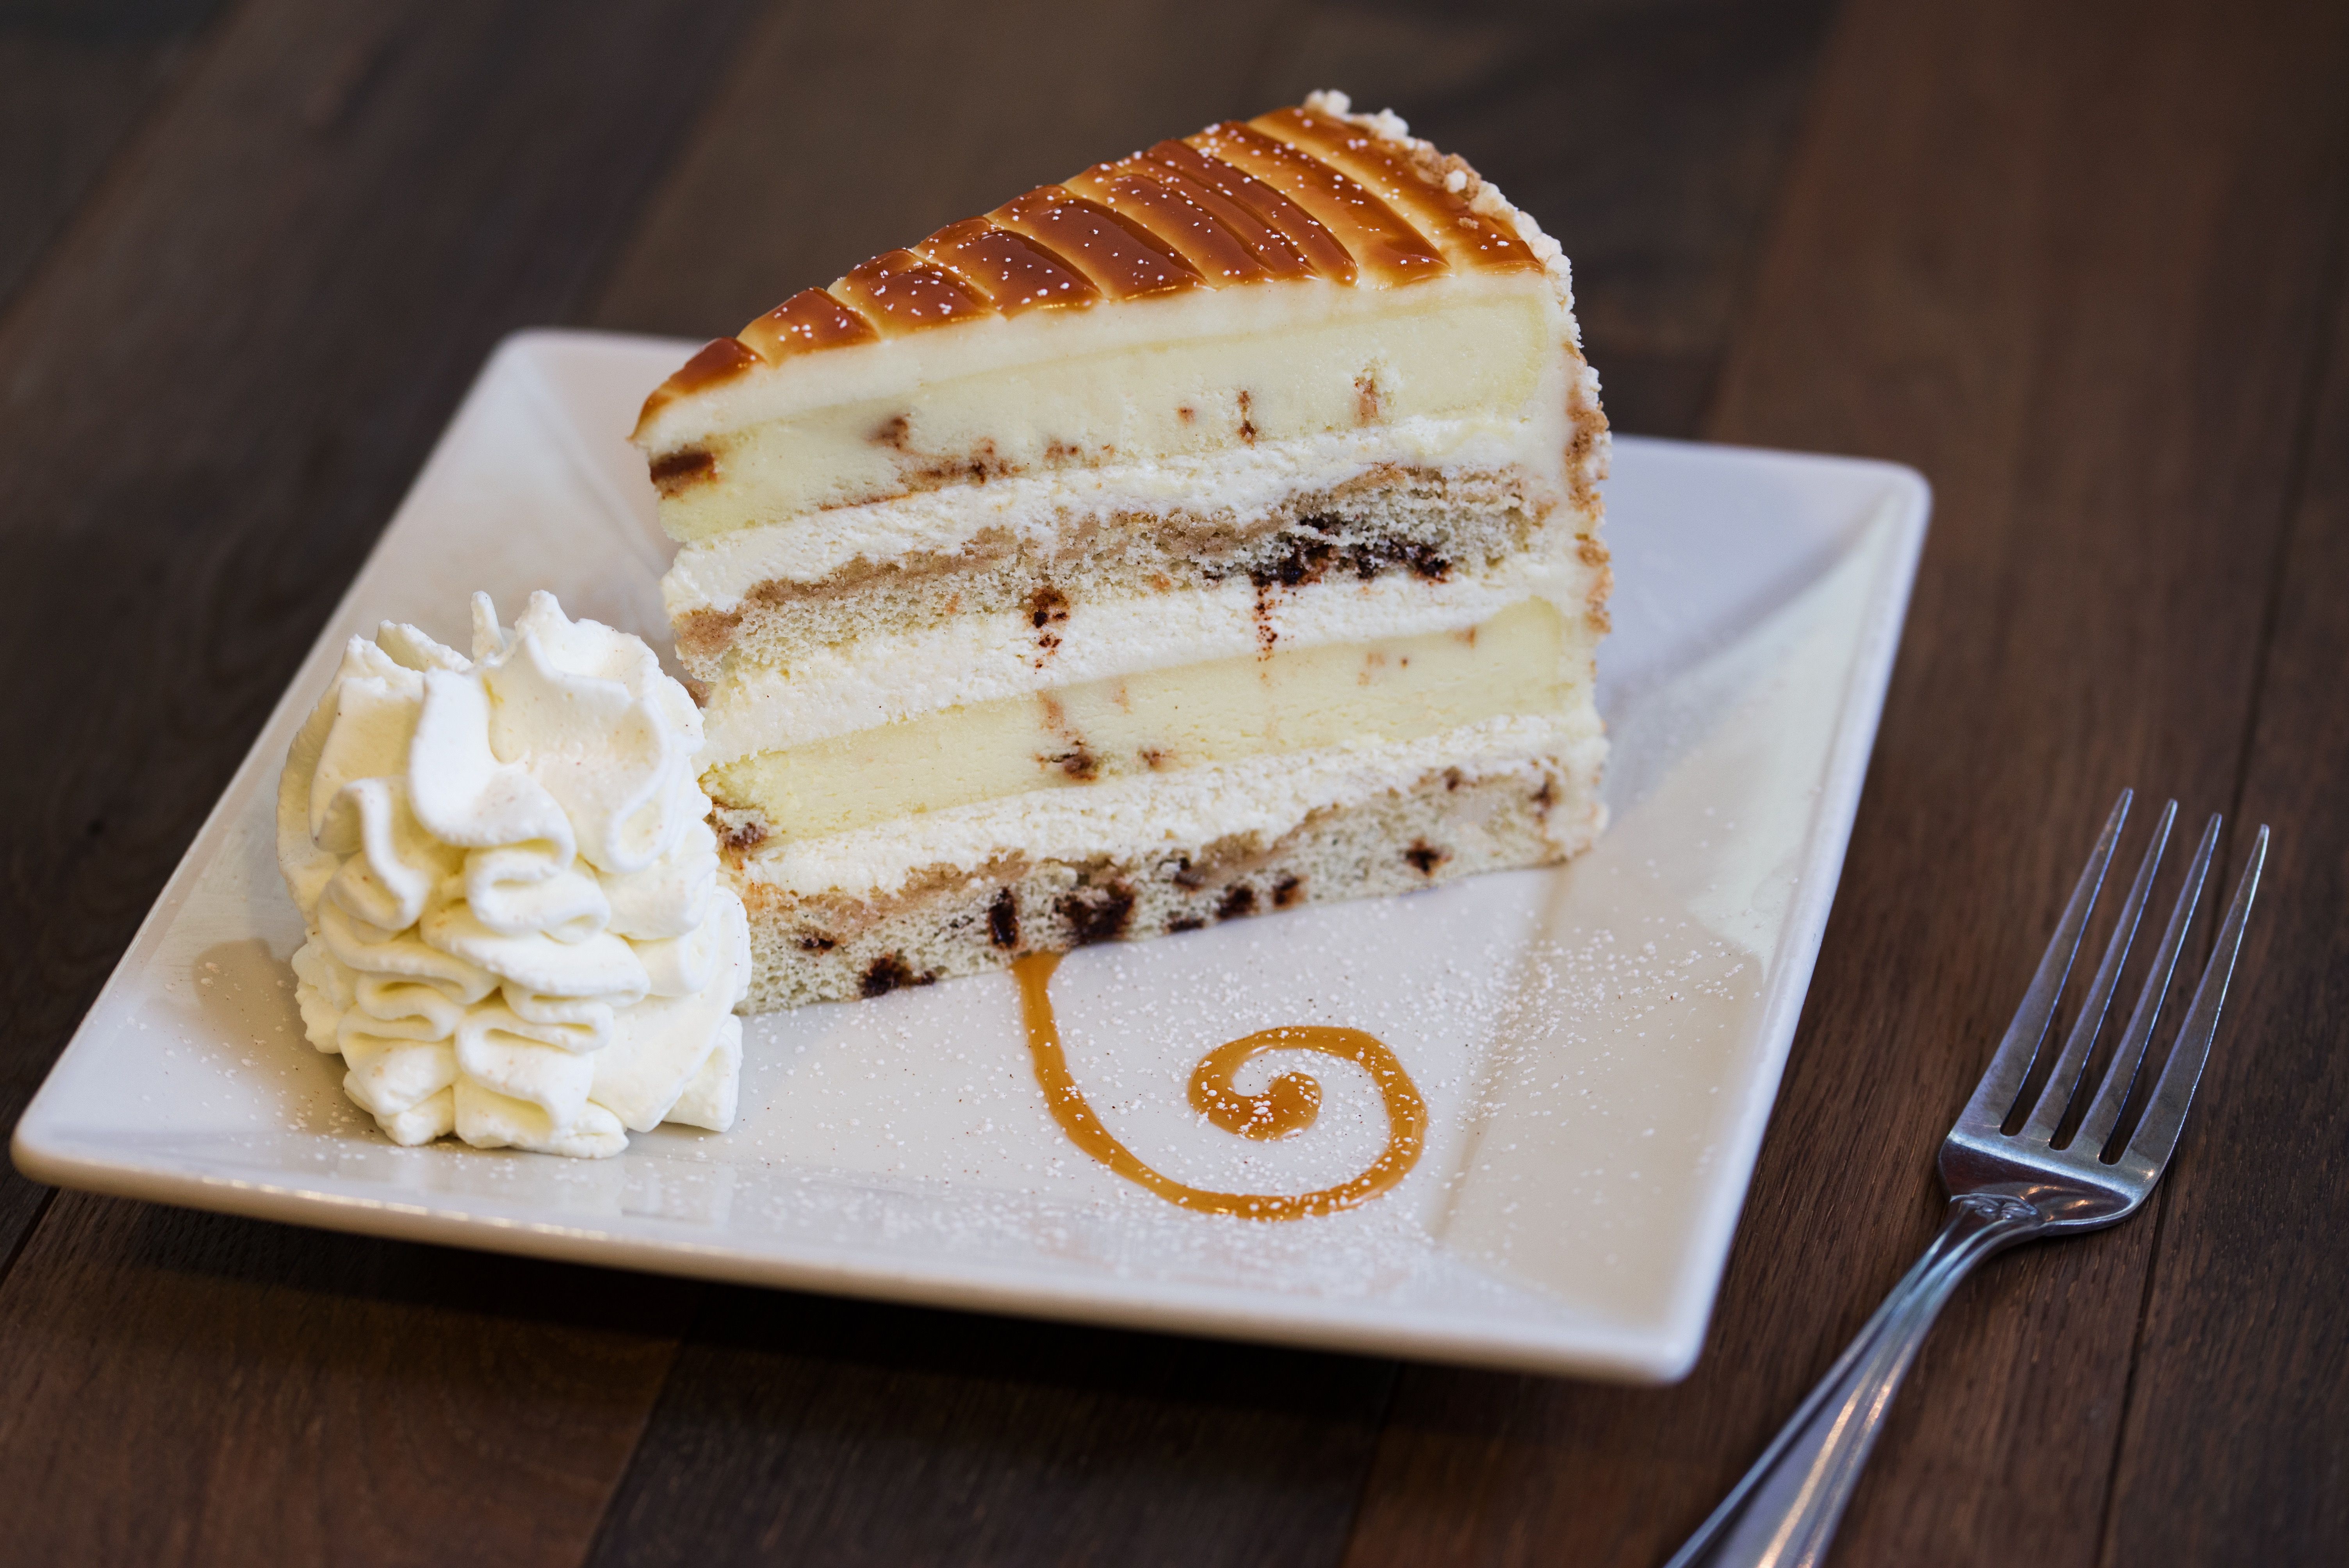 The Cheesecake Factory Released Two New Amazing Cheesecake Flavors